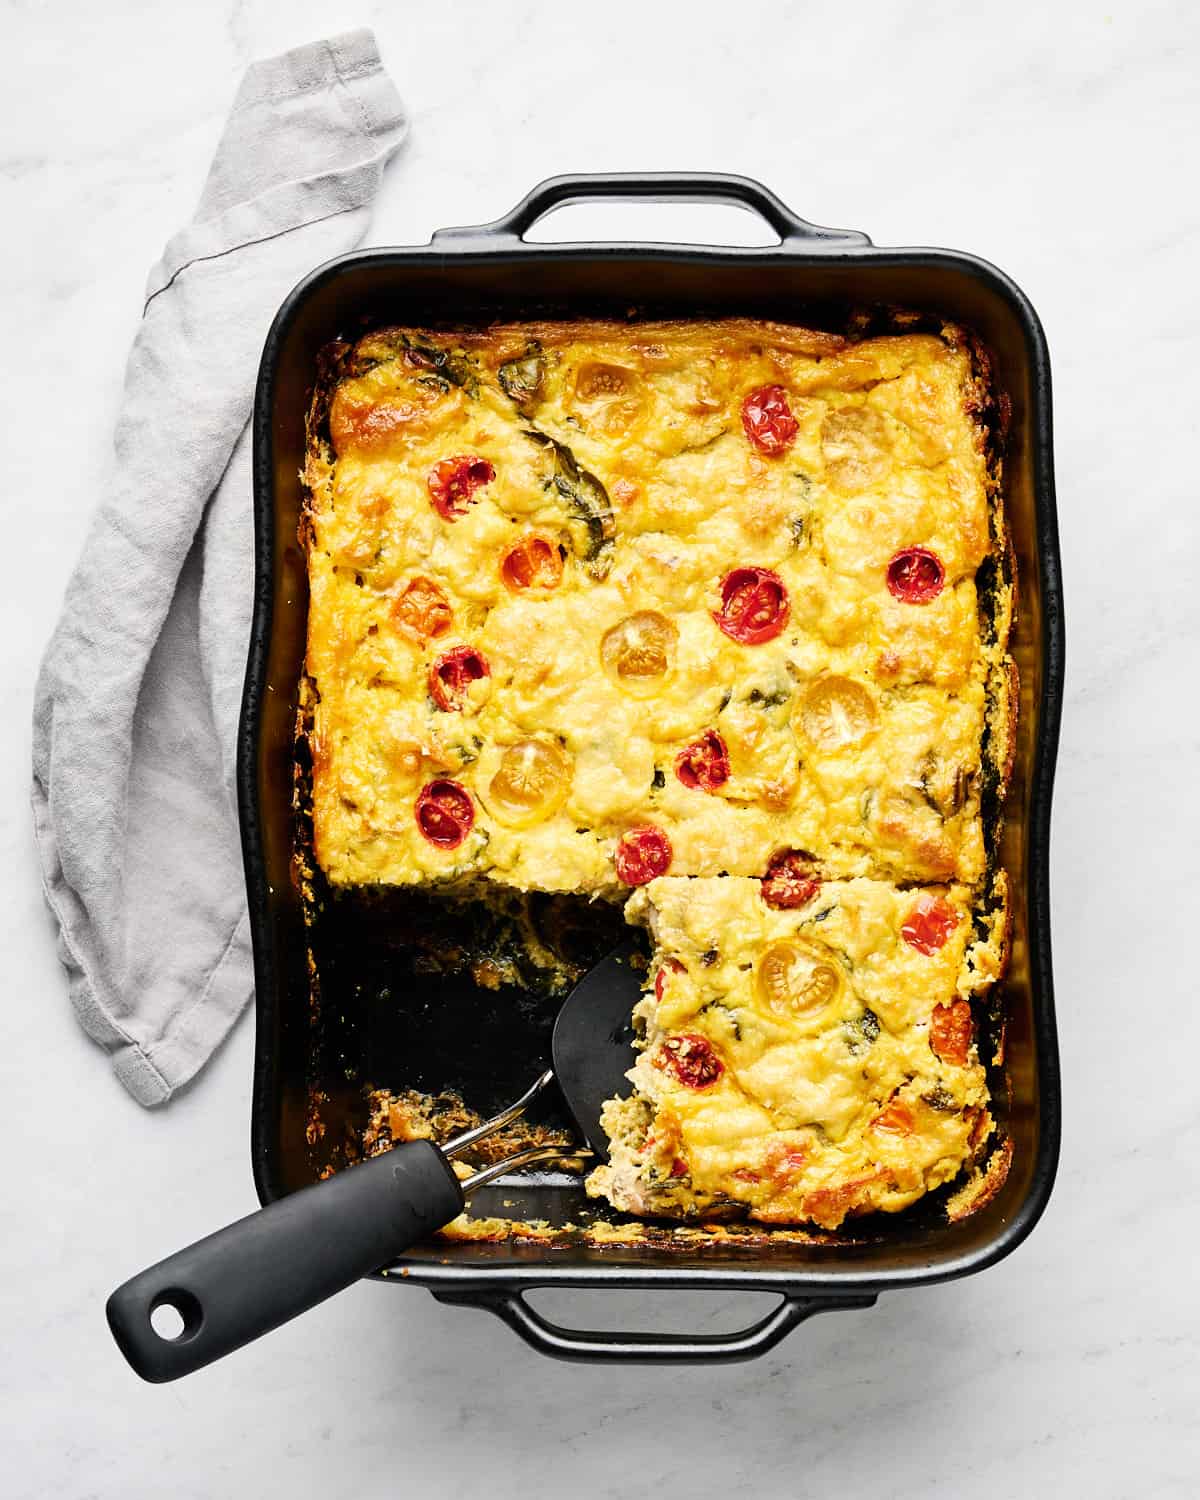 JUST Egg Frittata in a baking dish with a portion taken out with a spatula.